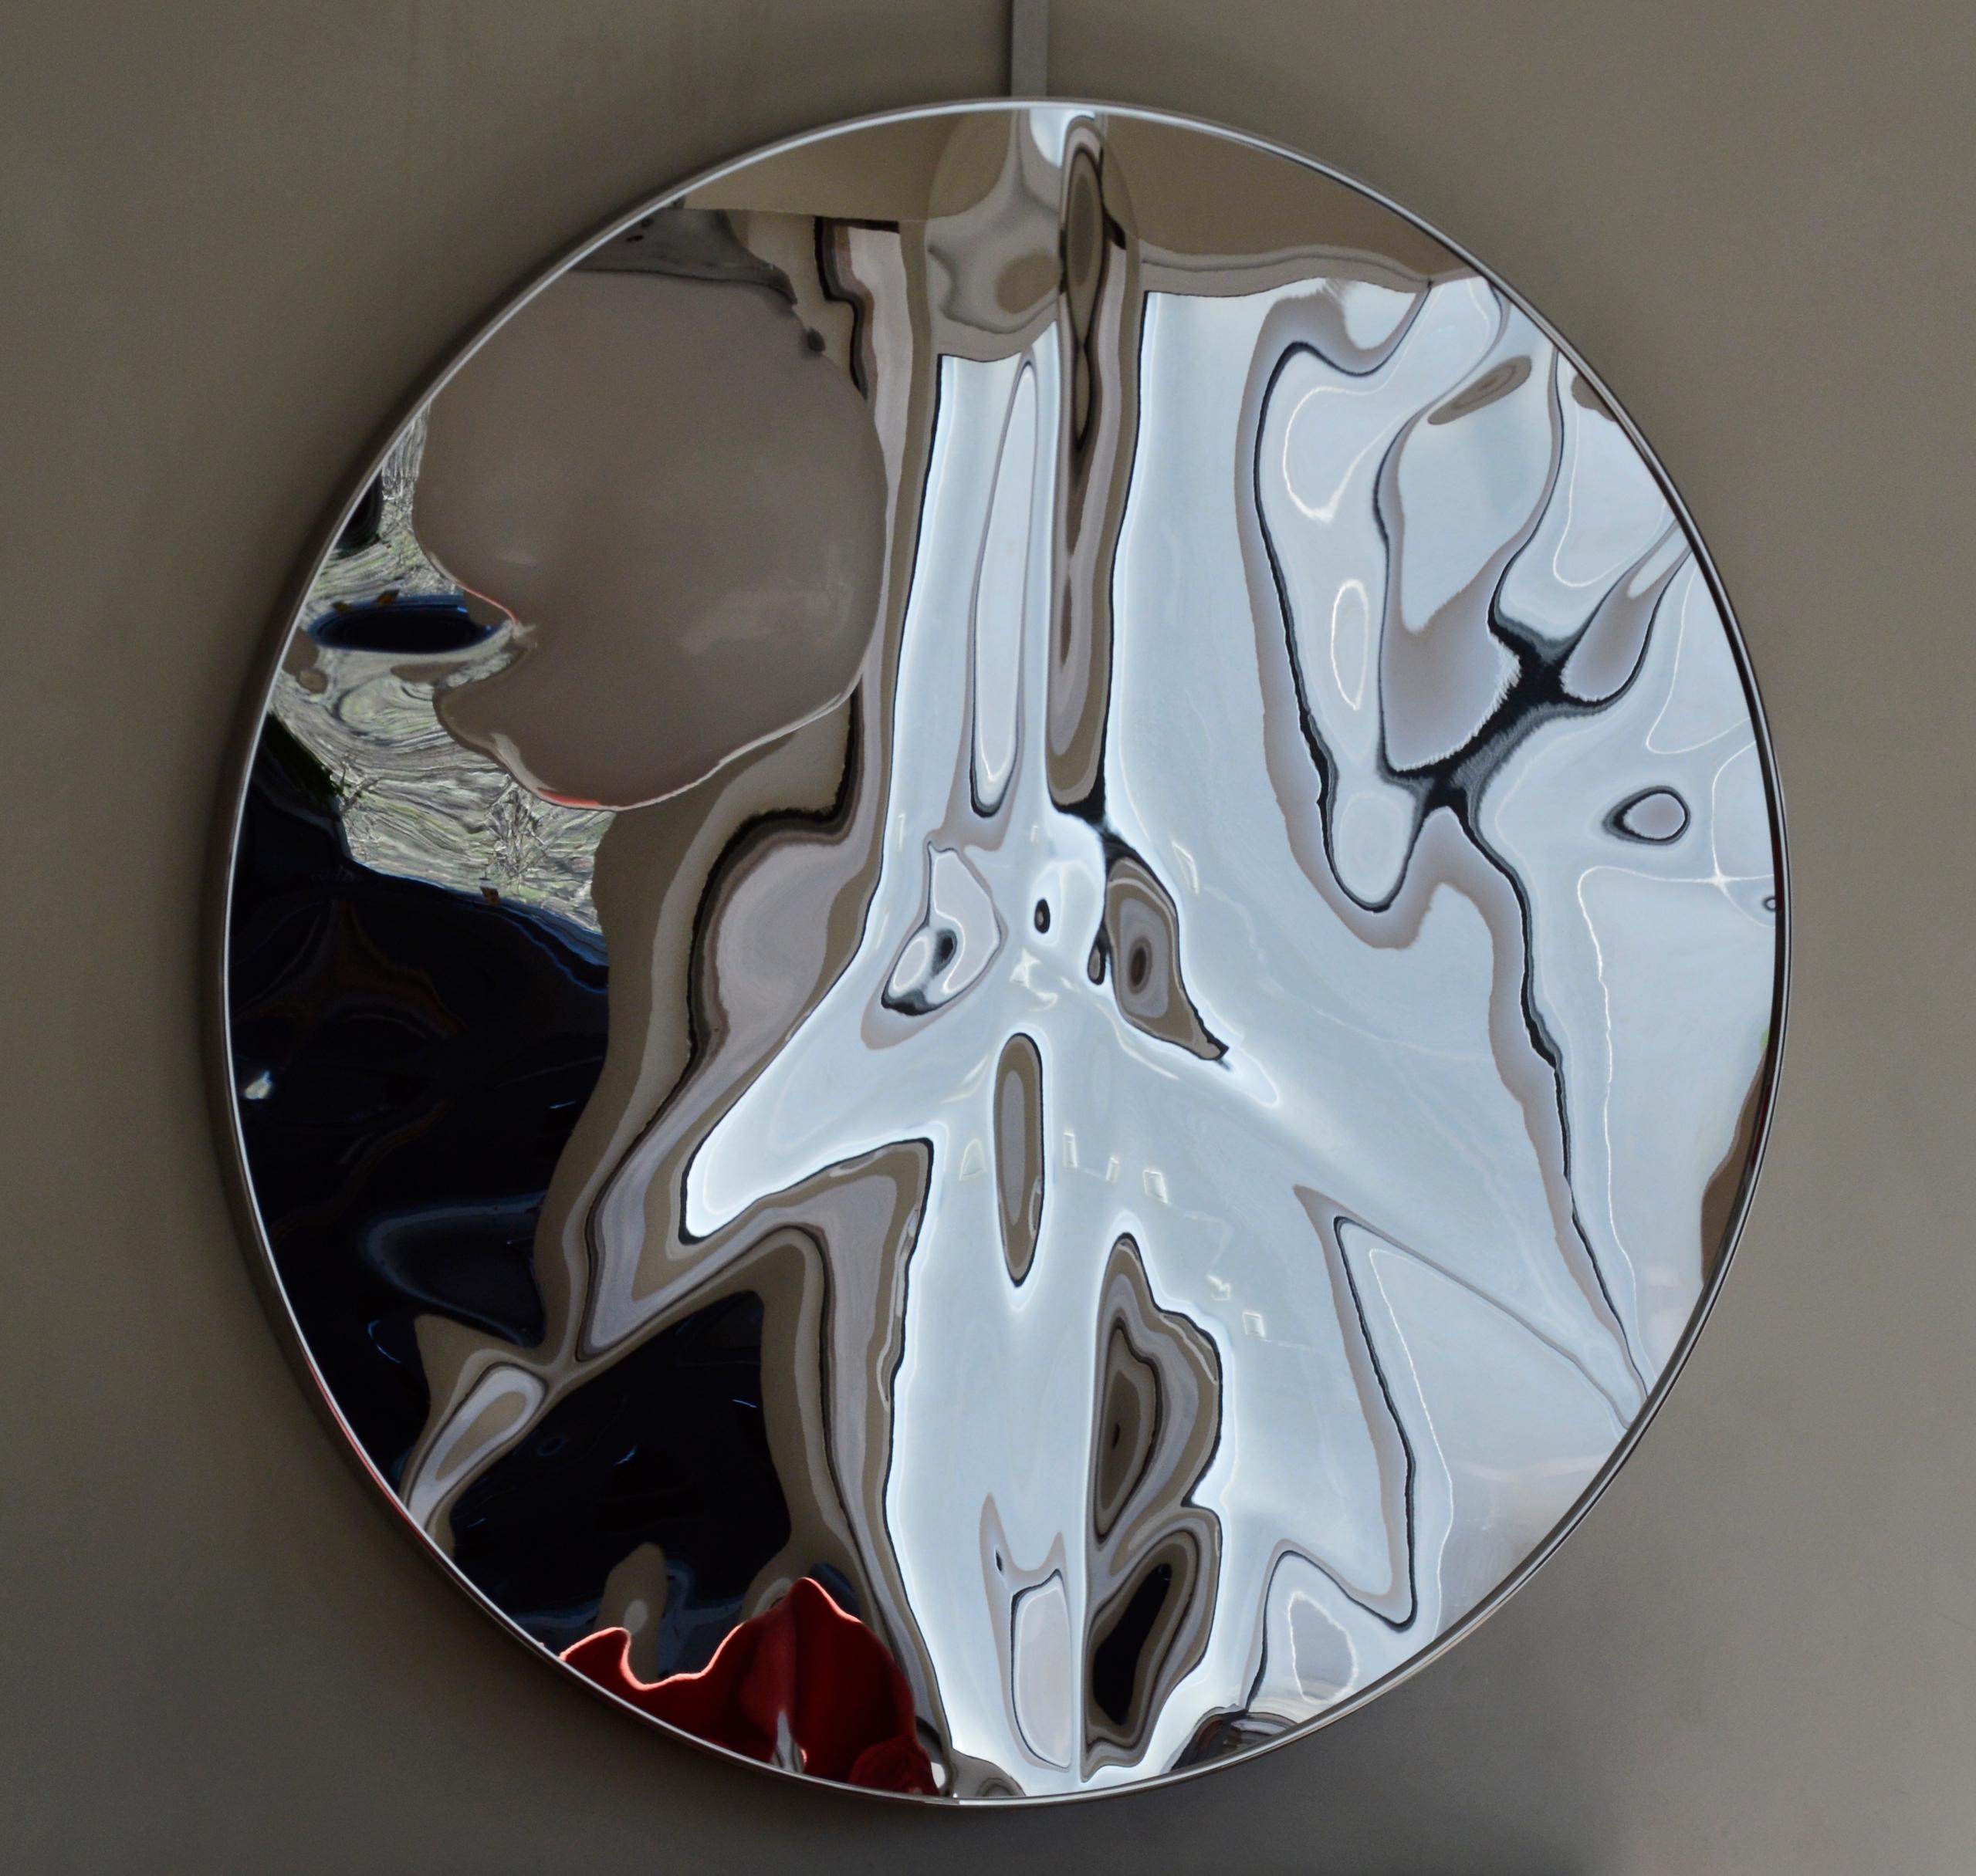 Peace and Love II by Franck K - Stainless steel wall sculpture, reflections For Sale 1